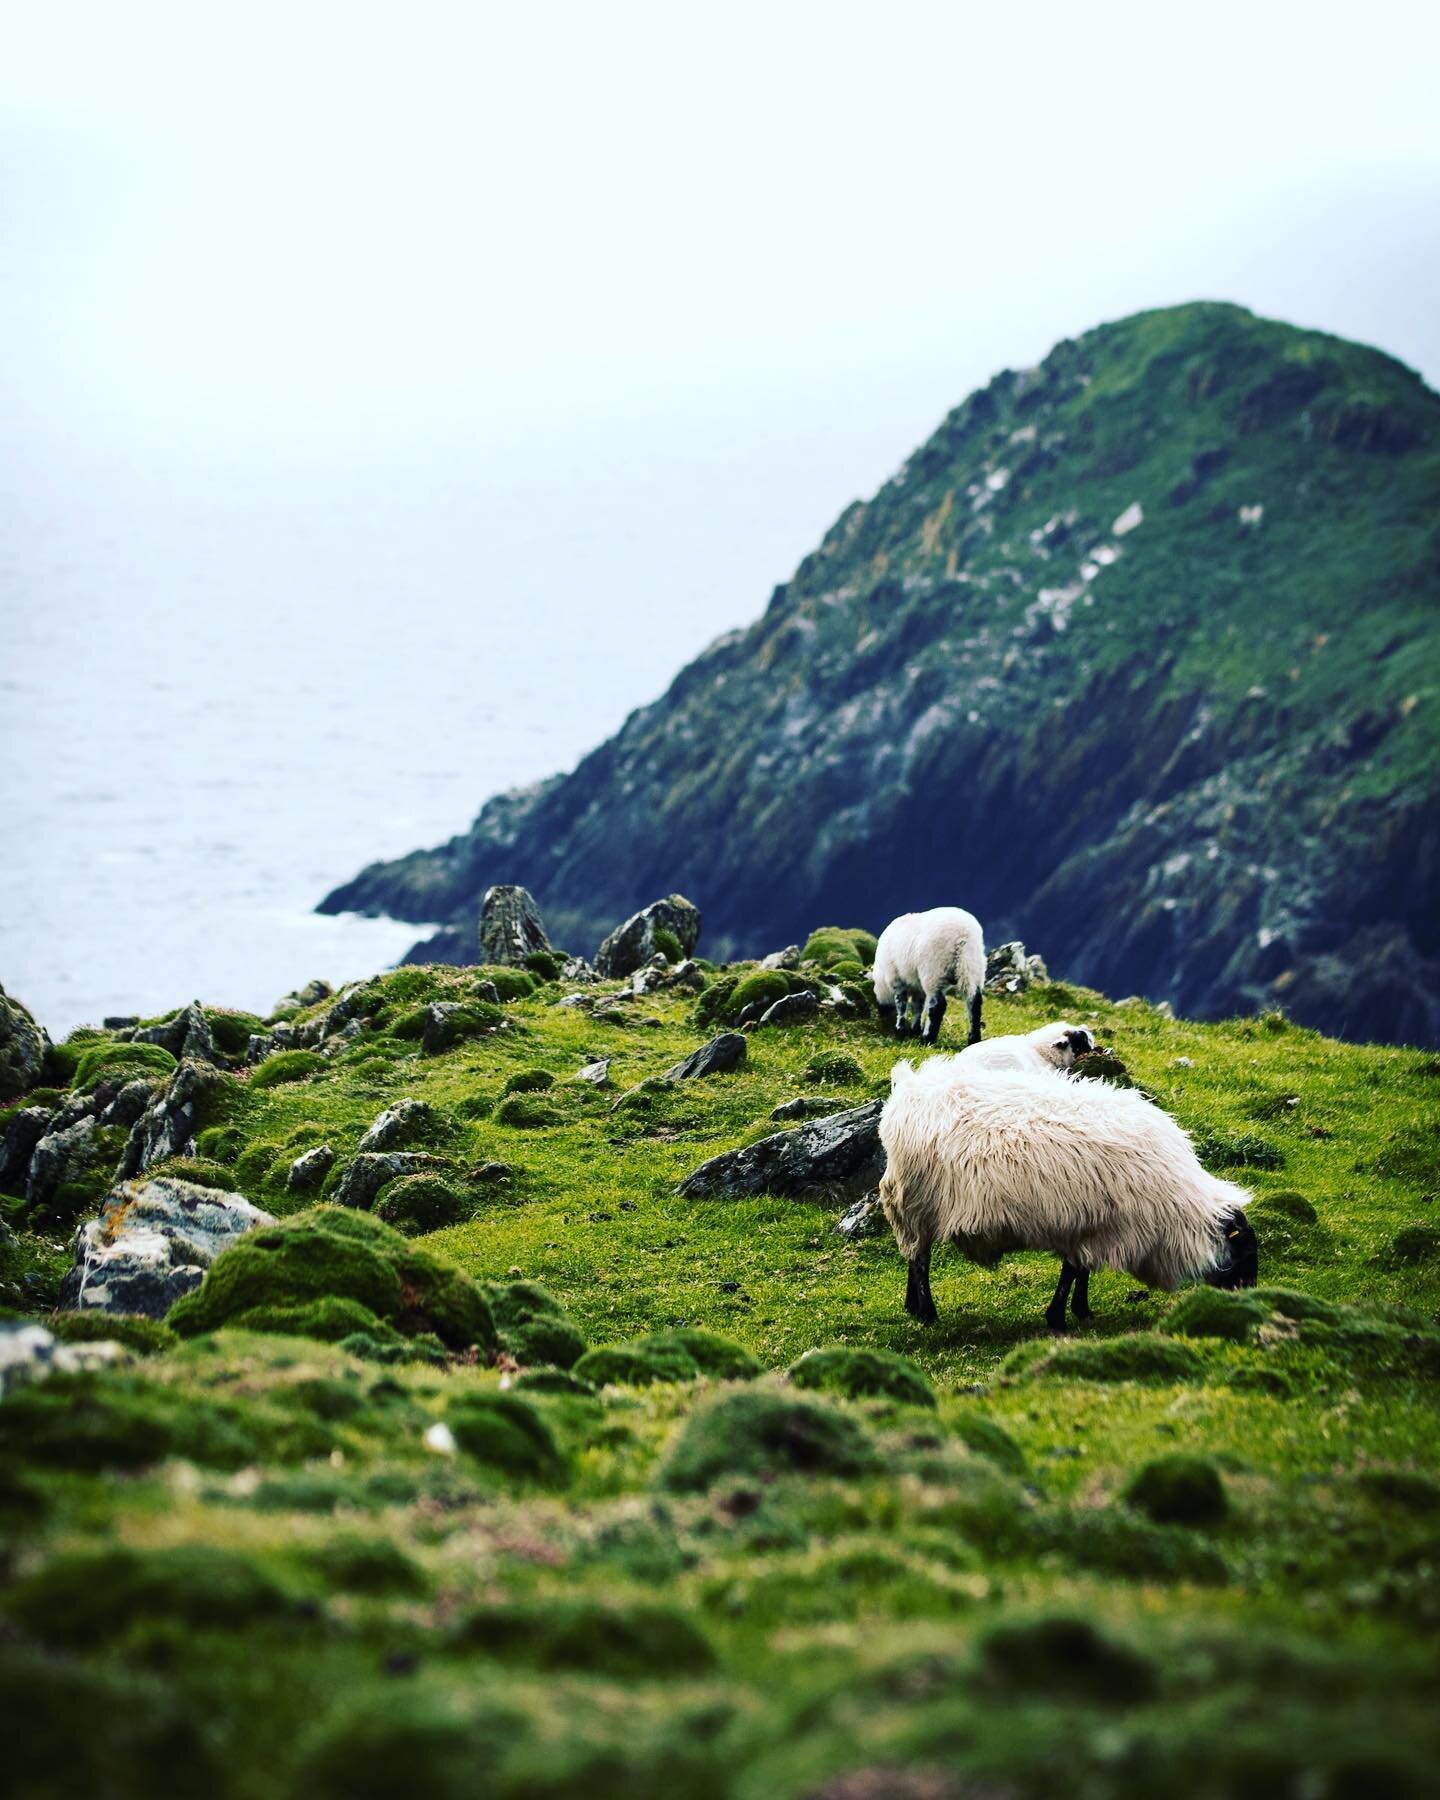 Ireland opened today to vaccinated US tourist without a COVID test.  Is the Emerald Isle on your #Wanderlist?
 
#luxurytravel #Wanderlust #VirtuosoTravel #travel #vacation #vacationmode #vacationvibes #travelplanner #destination #Cadence #DCMTravel #